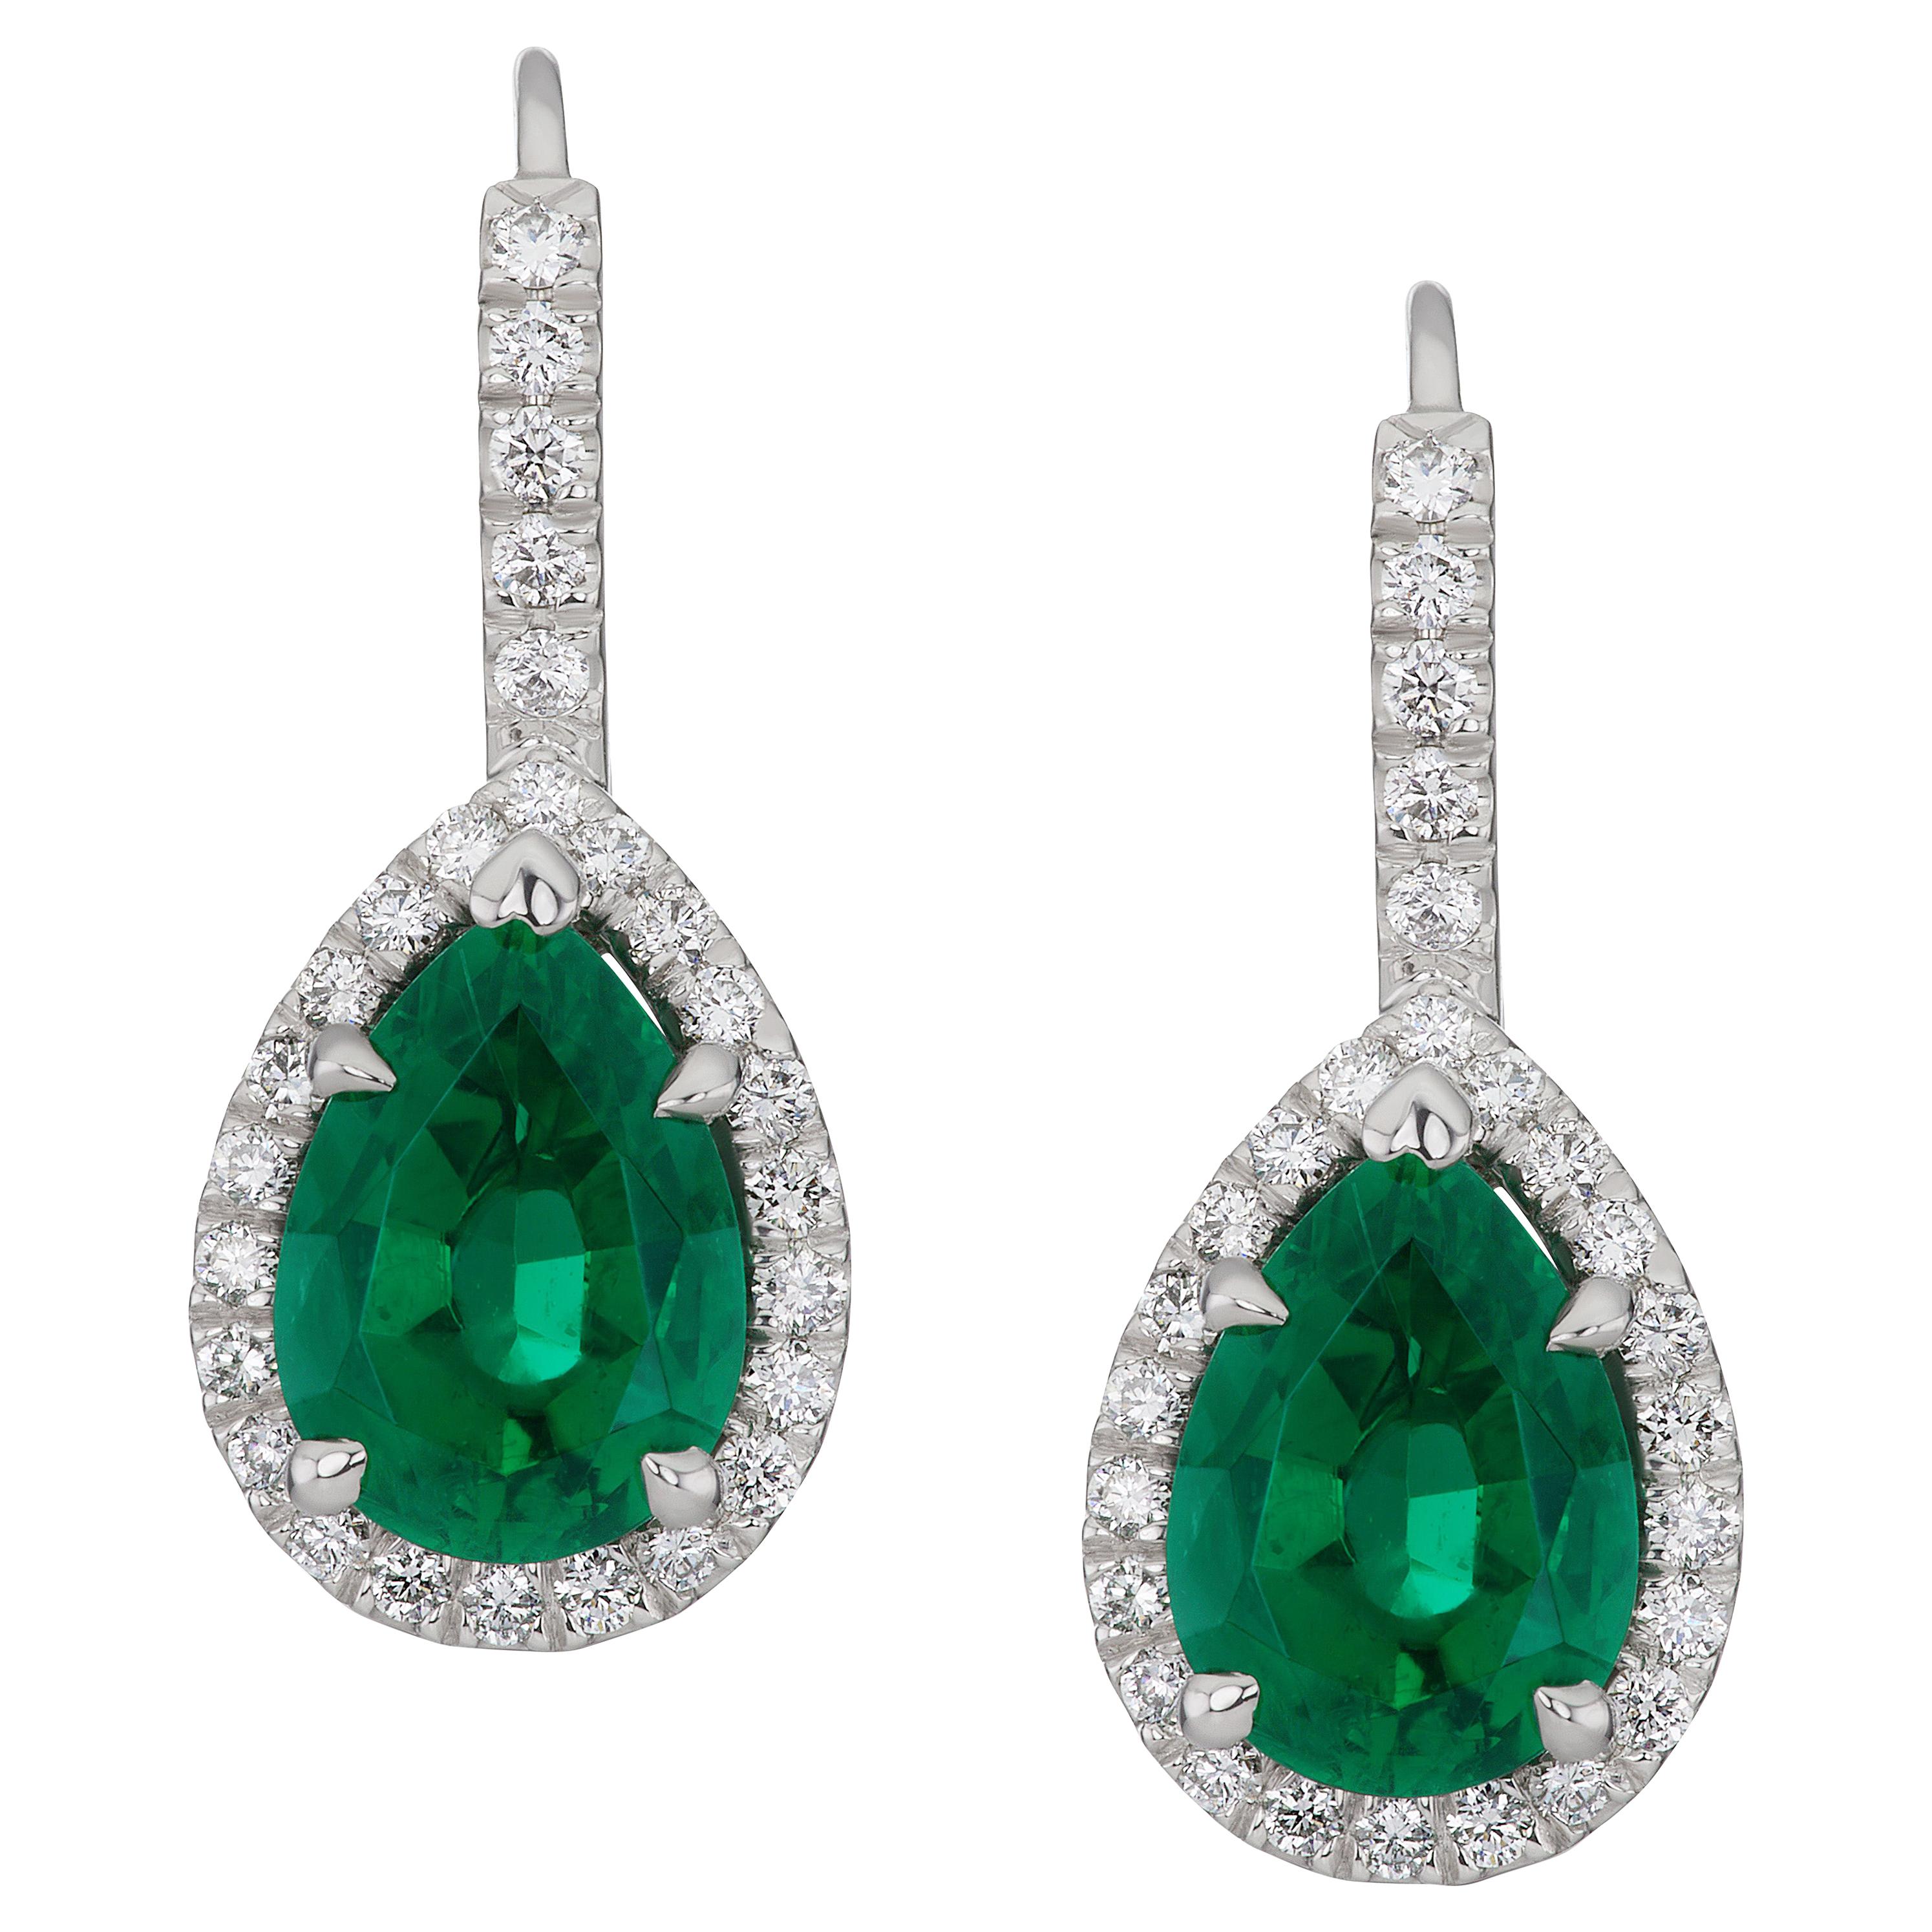 4.88 Carat African Pear Shape Emerald and Diamond Earrings with Lever Backs For Sale